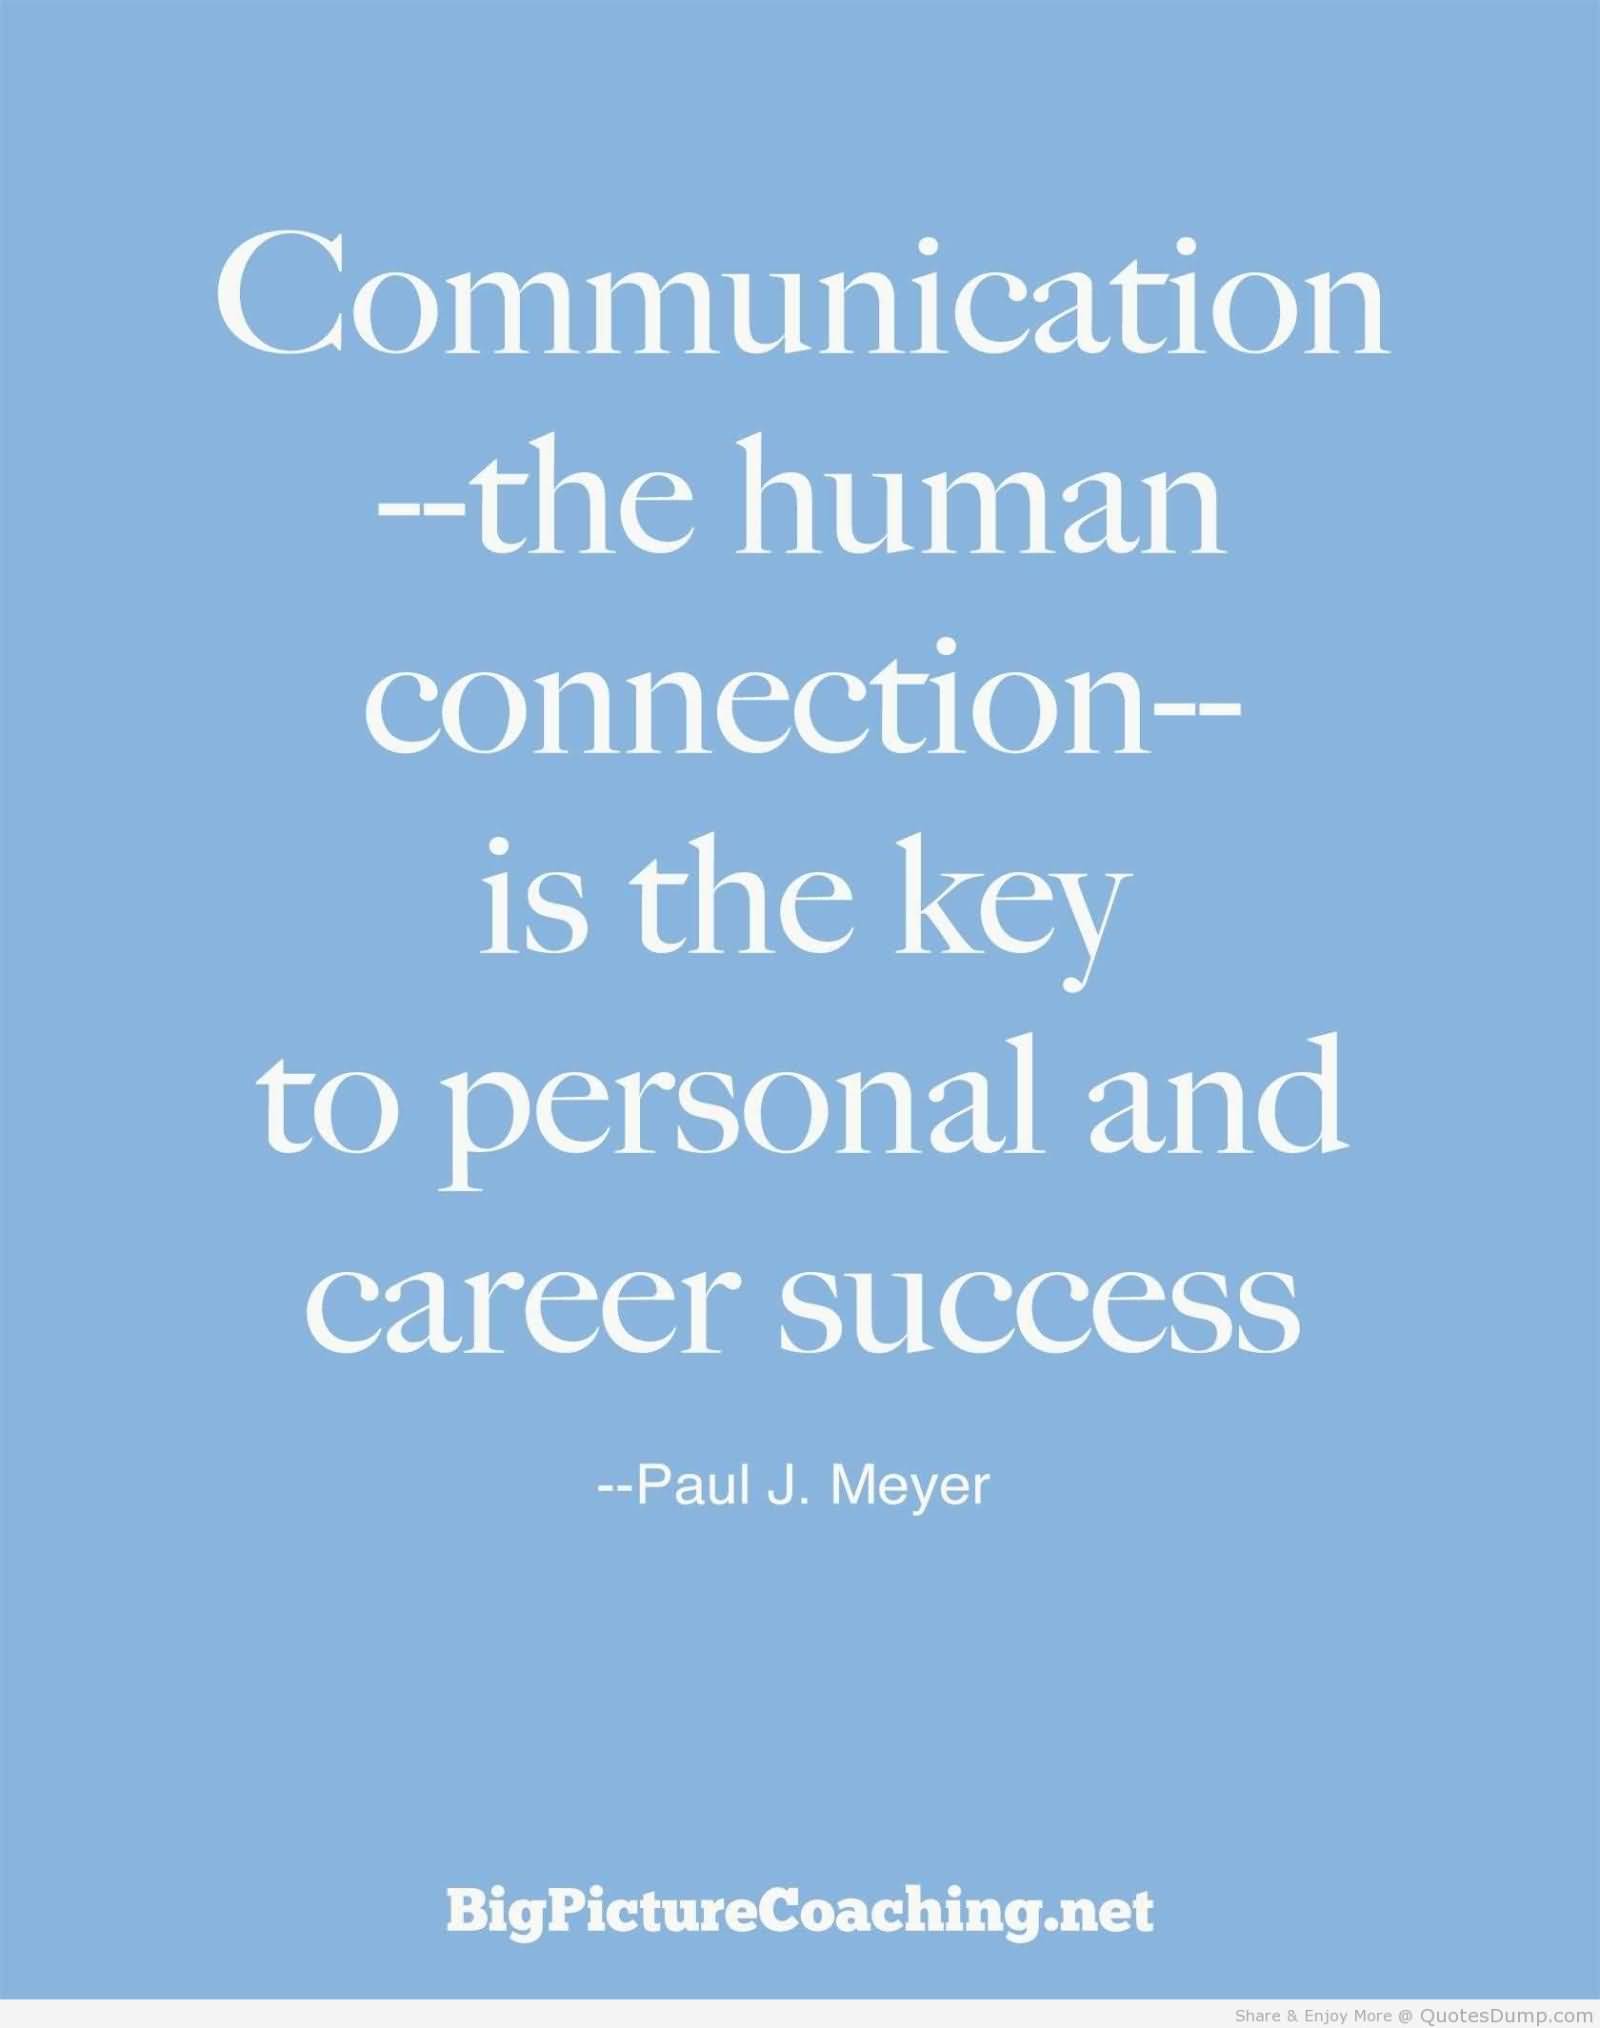 Communication - the human connection - is the key to personal and career success. Paul J. Meyer